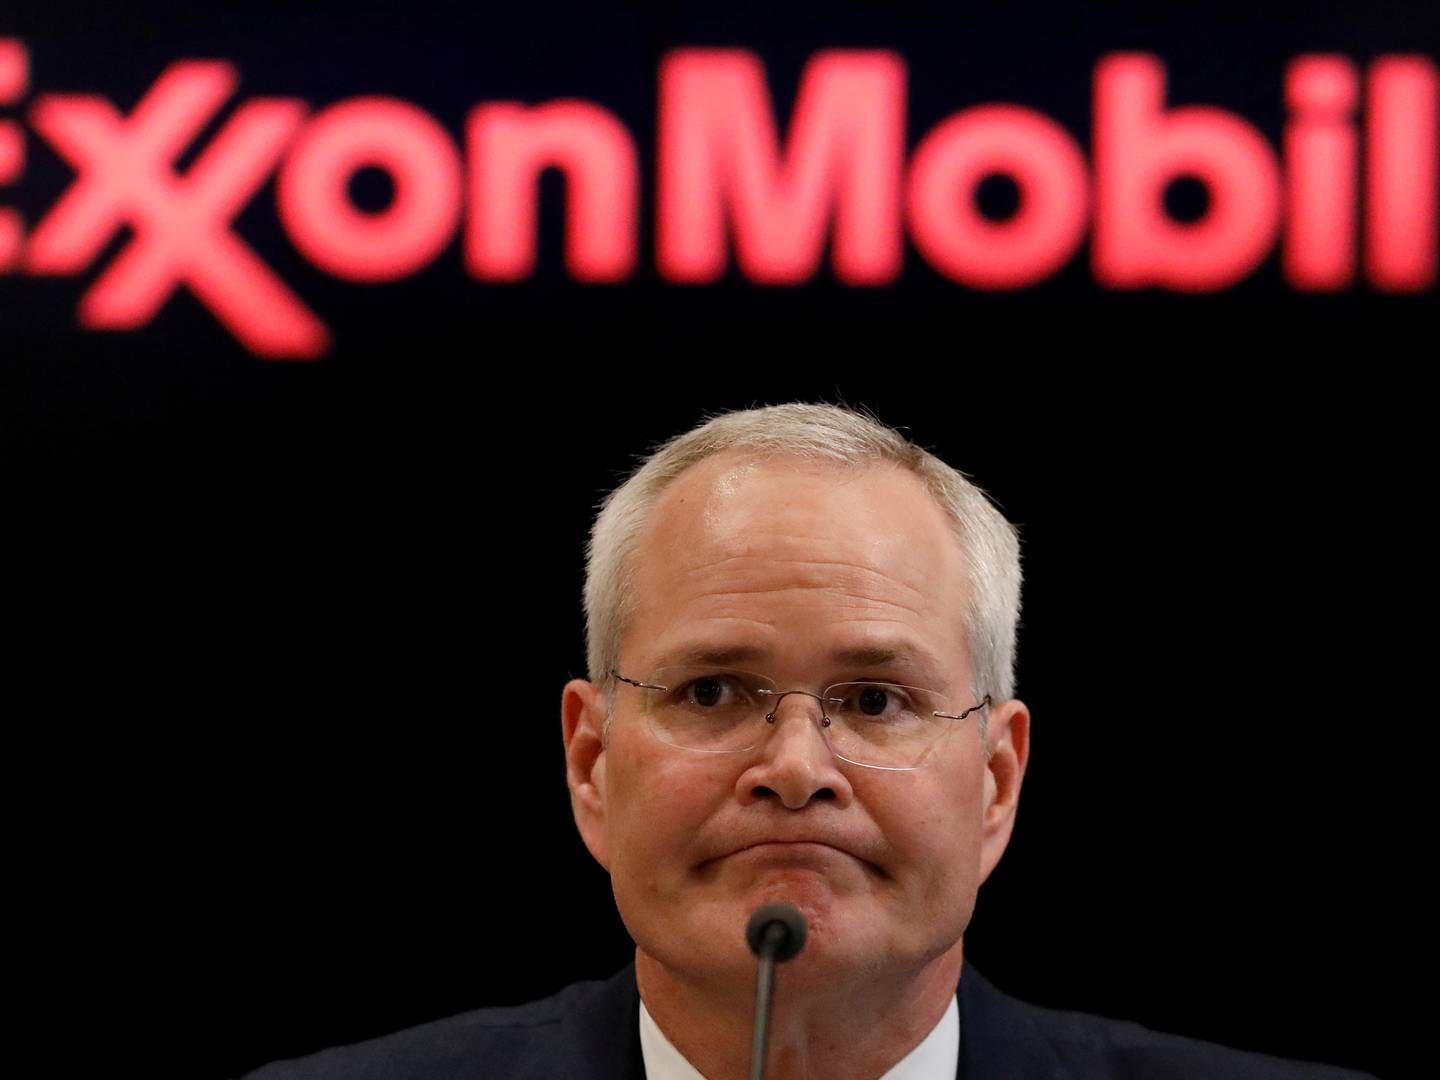 Darren Woods, chairman and CEO of Exxon Mobil Corporation, speaking at a conference in New York in 2017. | Photo: REUTERS/Brendan McDermid/File Photo